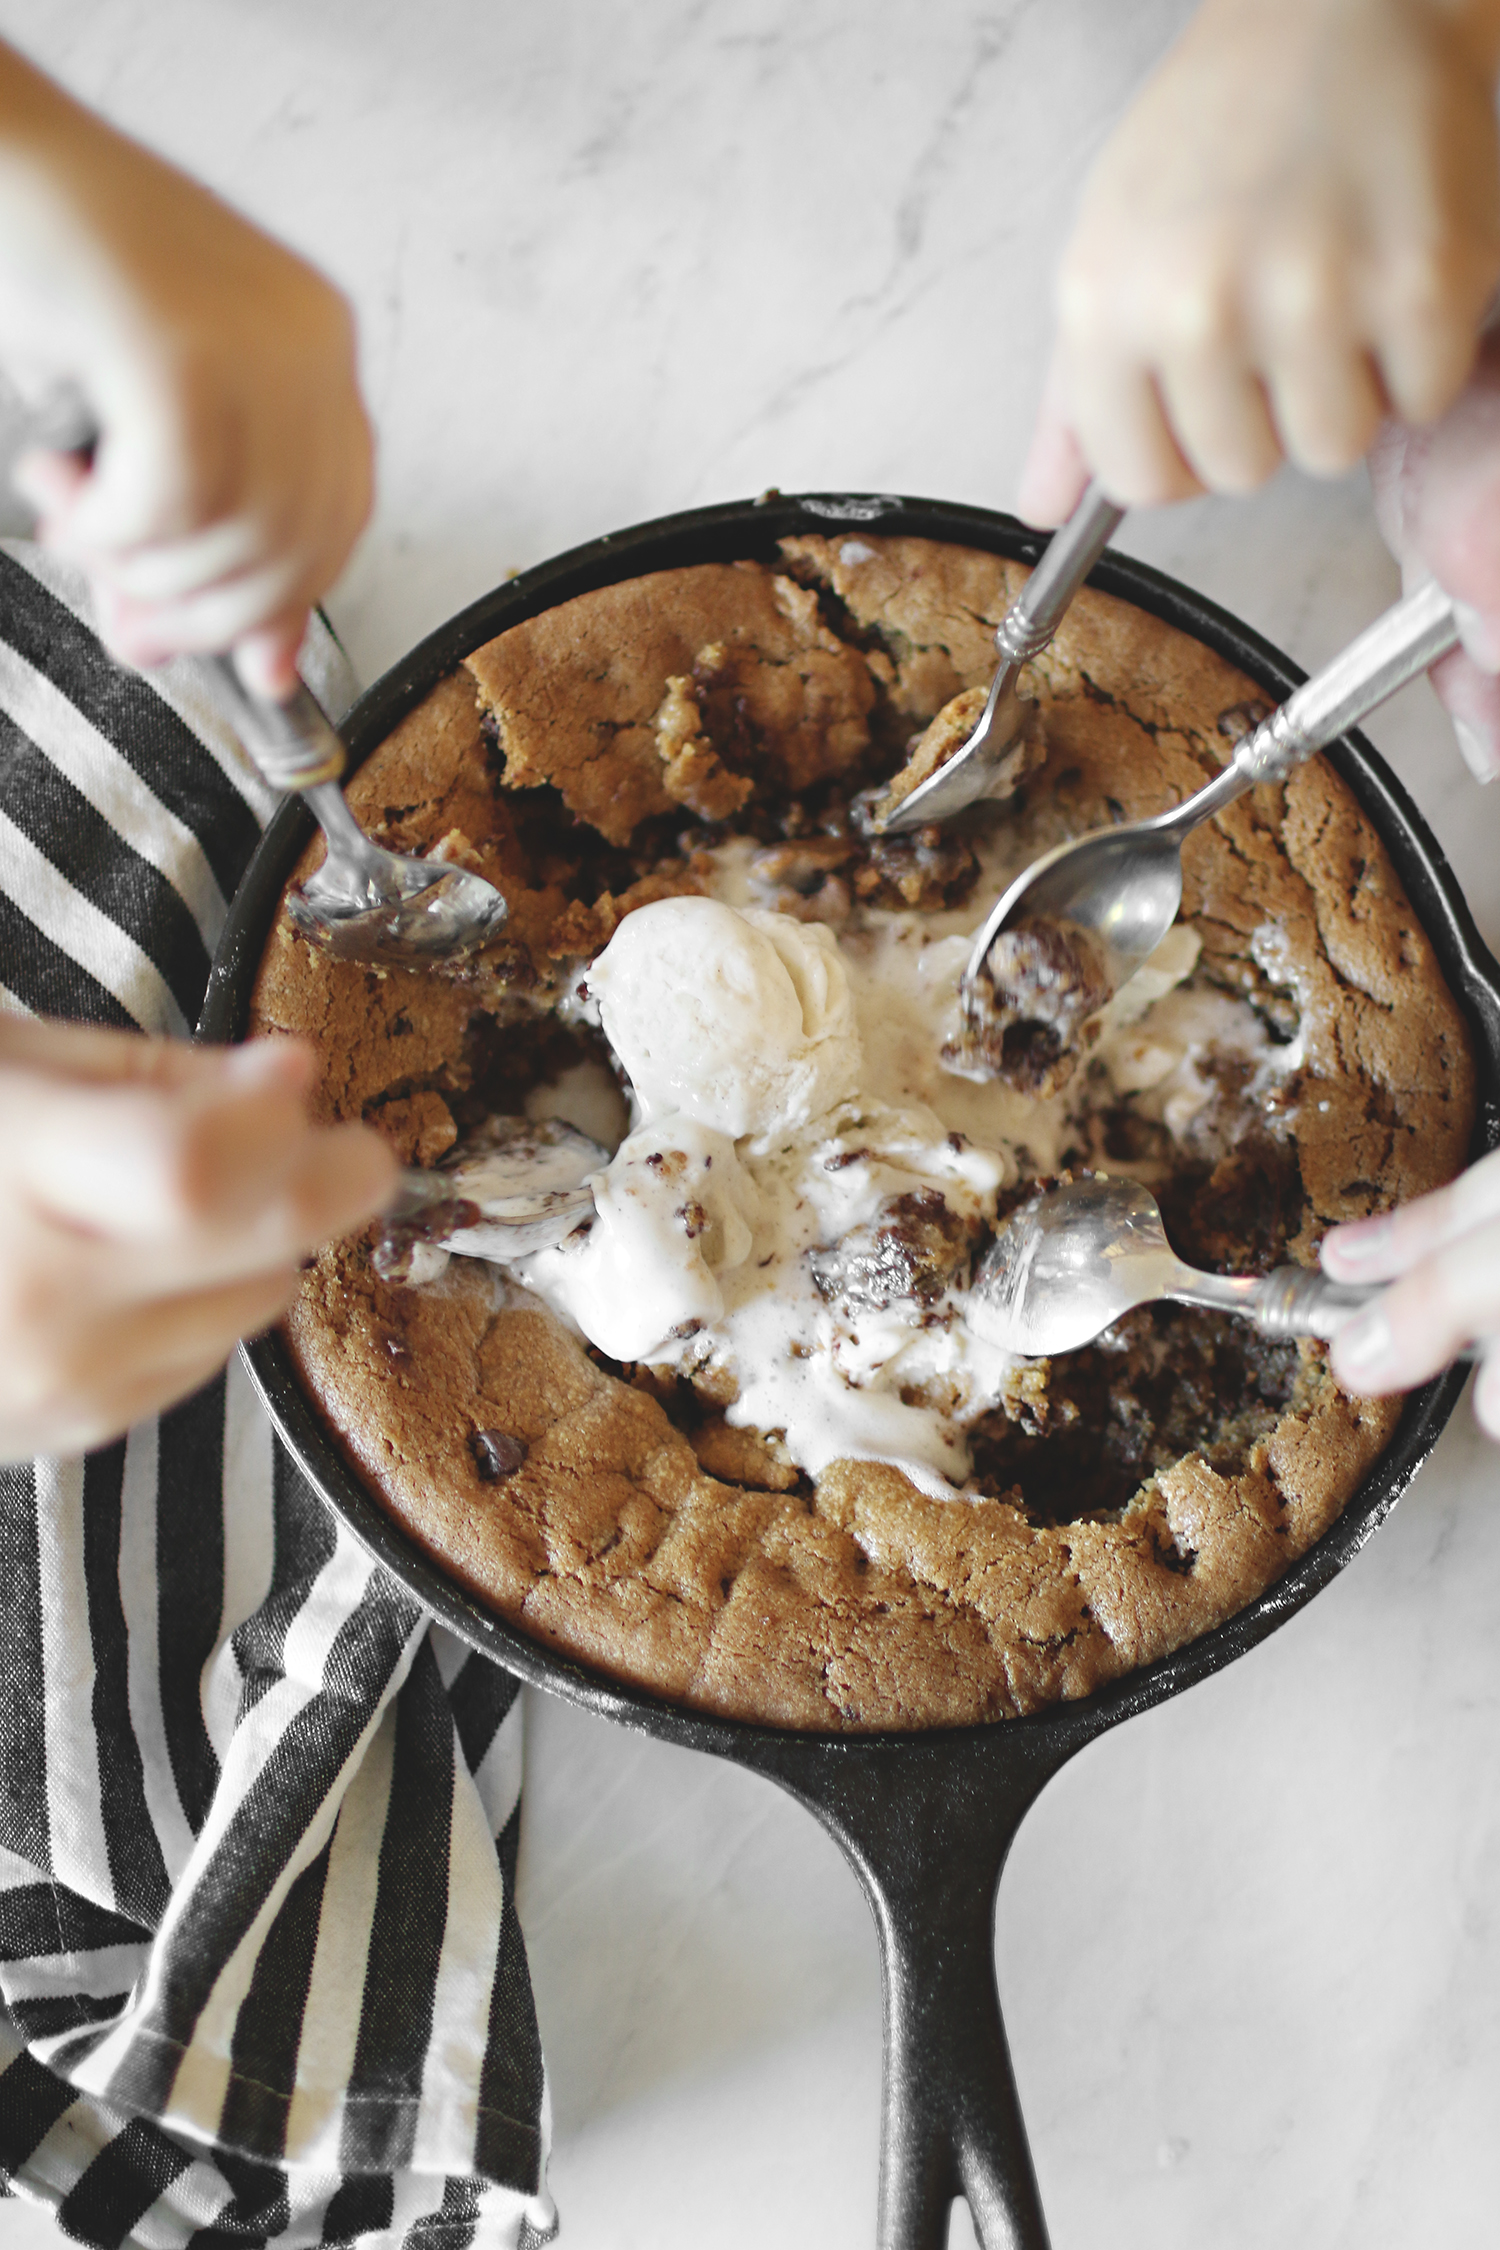 A dessert called Pazookie. An easy family recipe and one that is sure to become everyone's favorite! Catch the recipe over at Haus of Layne #Recipe #Dessert